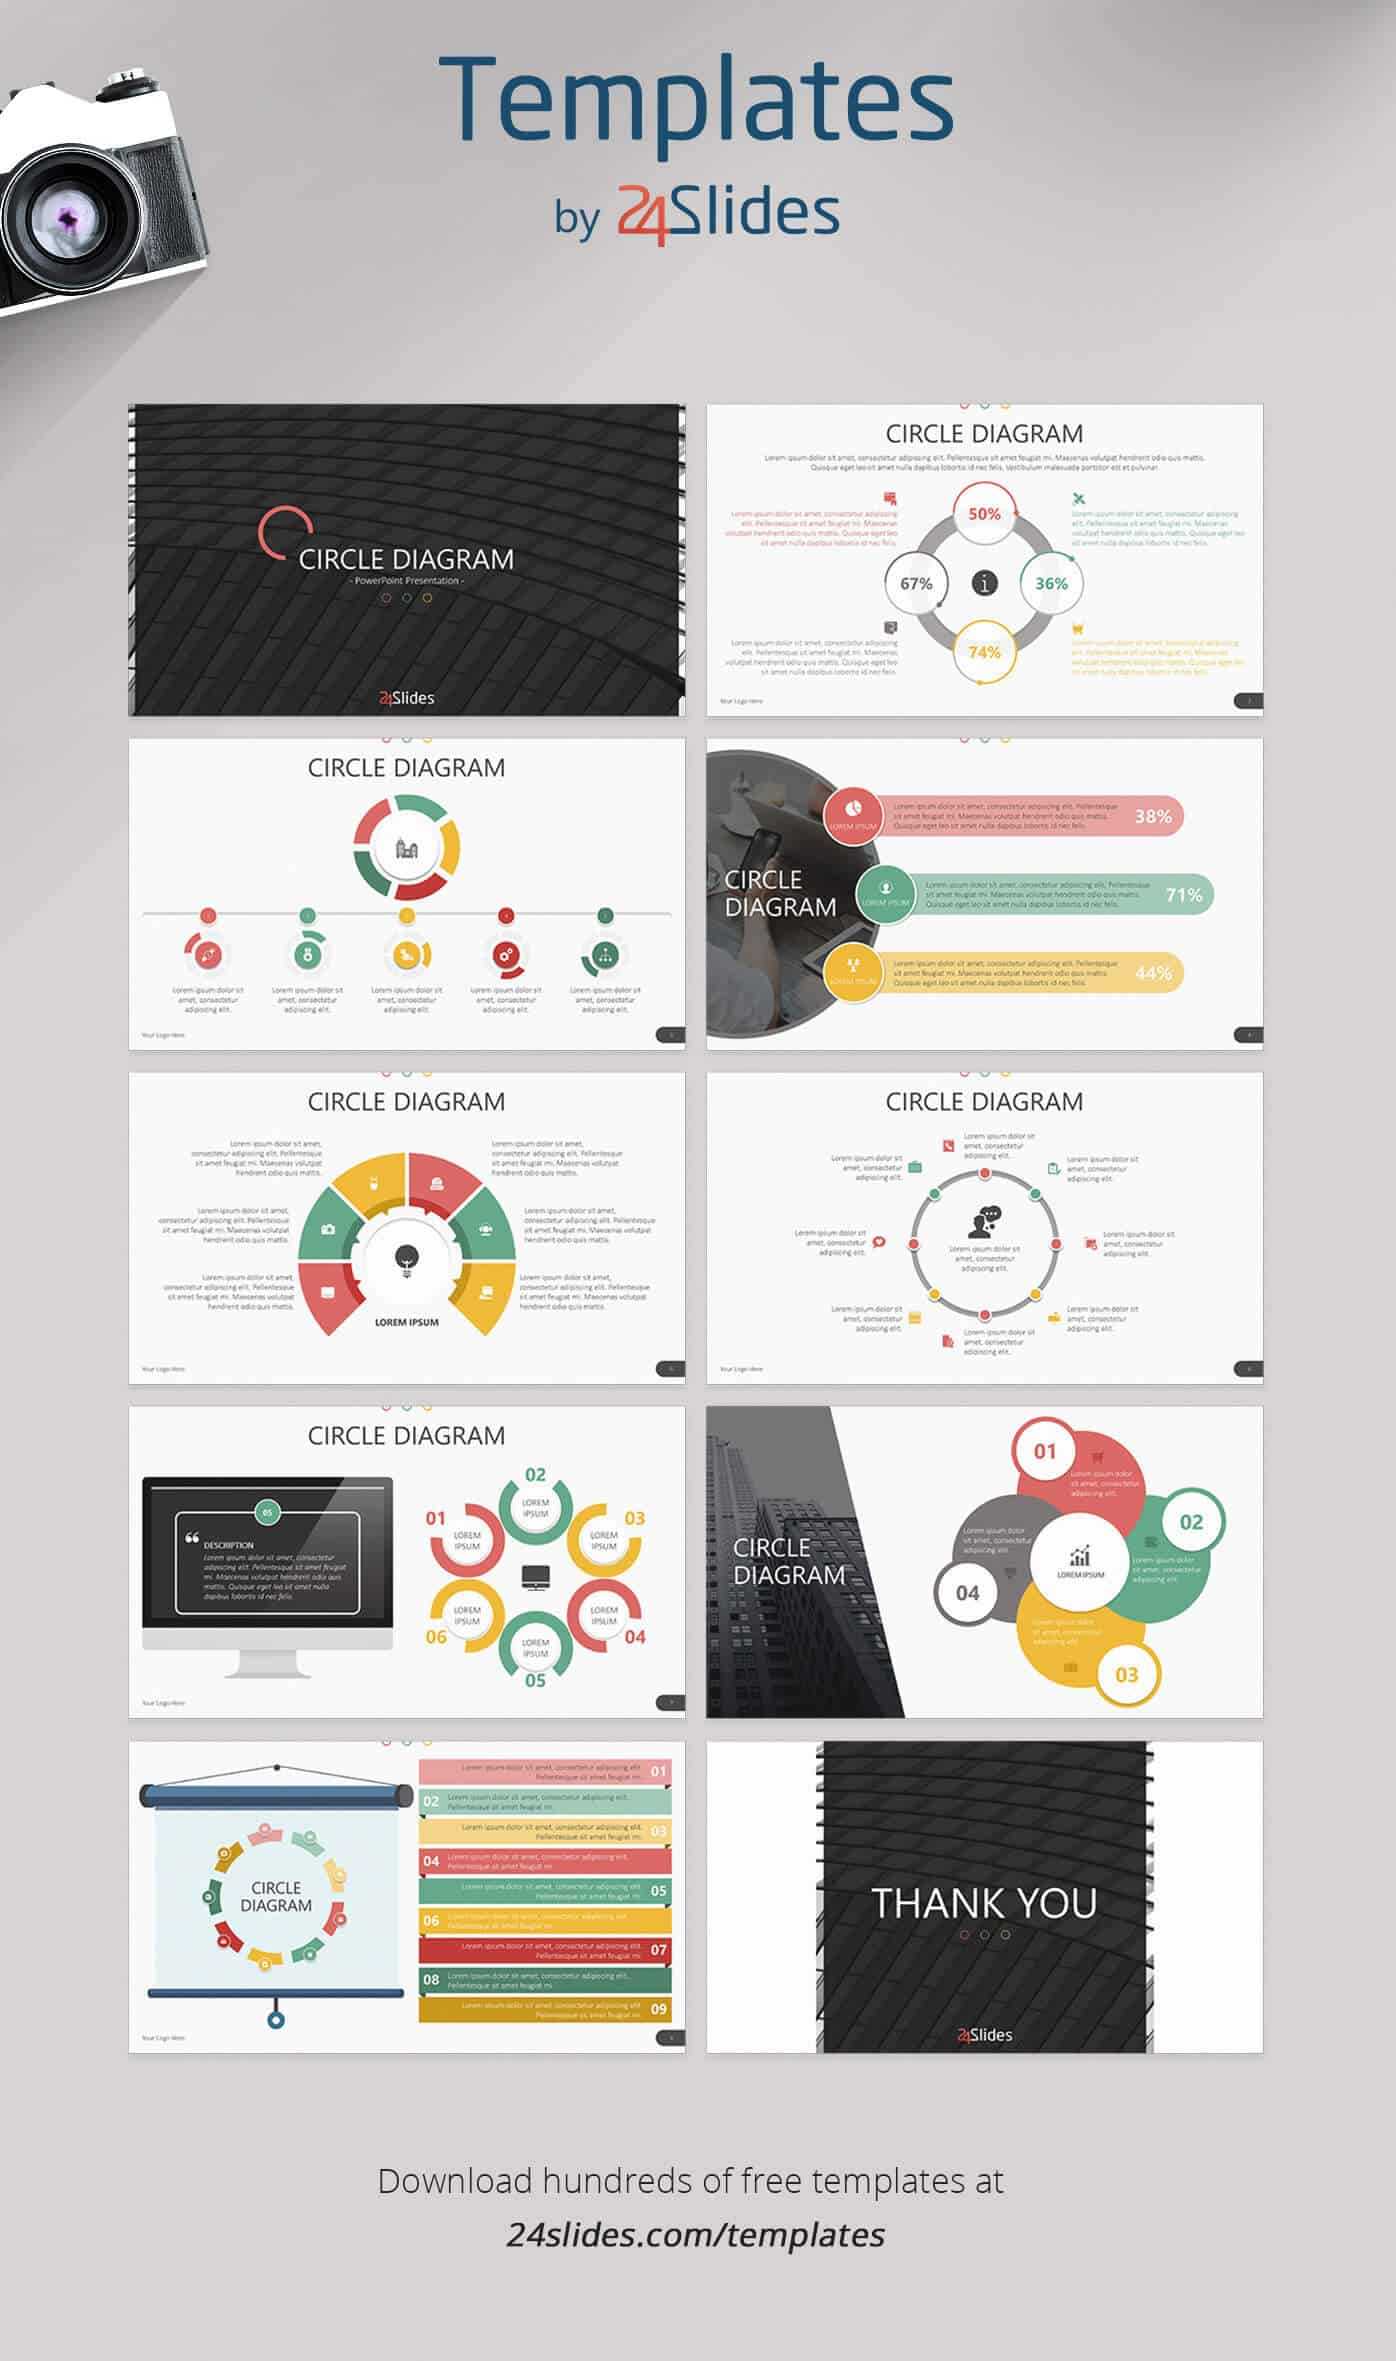 15 Fun And Colorful Free Powerpoint Templates | Present Better For Powerpoint Slides Design Templates For Free